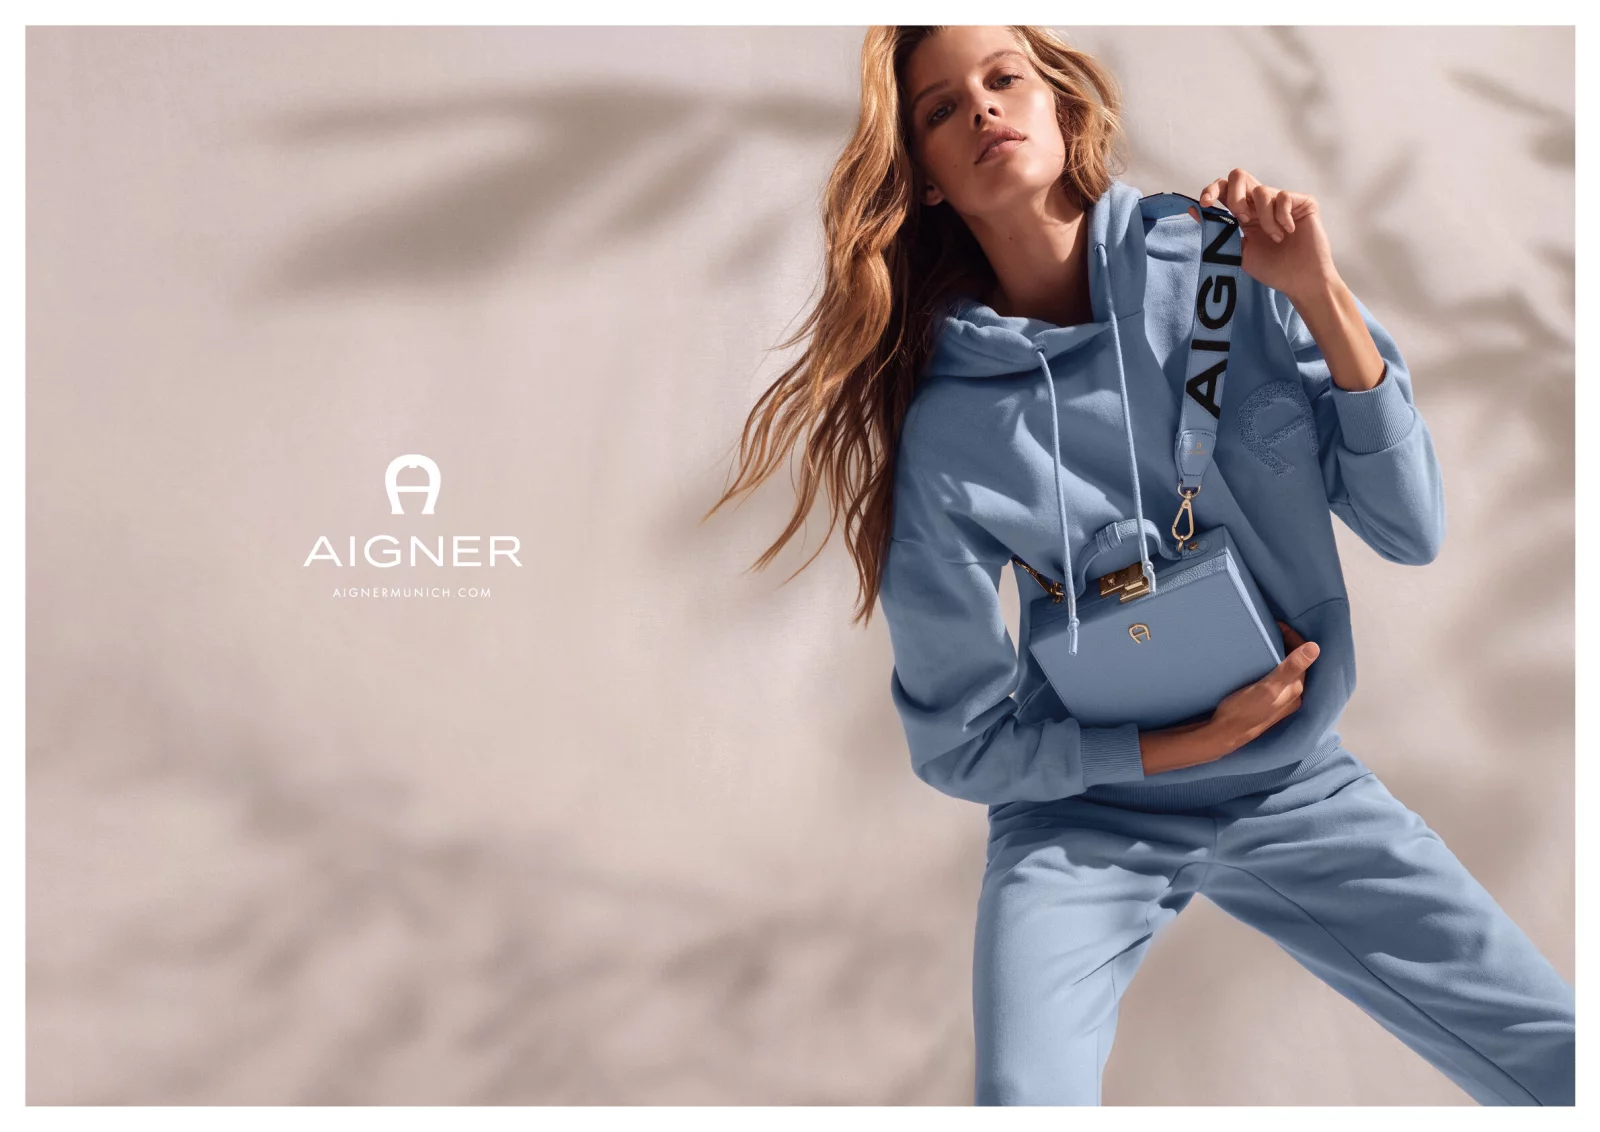 AIGNER 7 by Andreas ORTNER